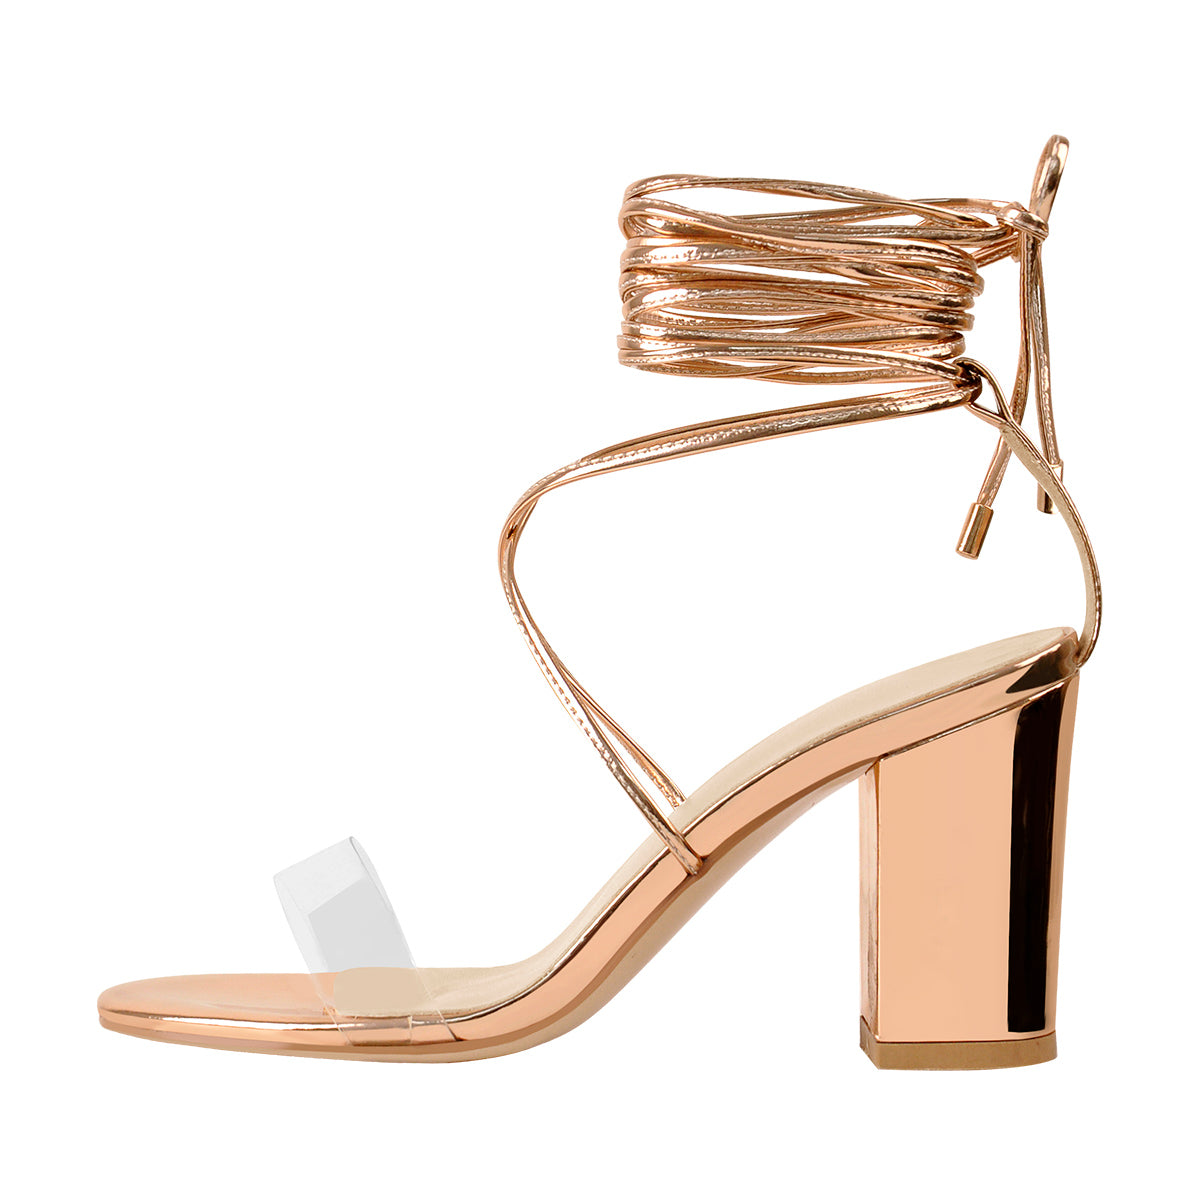 Women's Strappy Ankle High Heel Sandals Rose Gold Color 